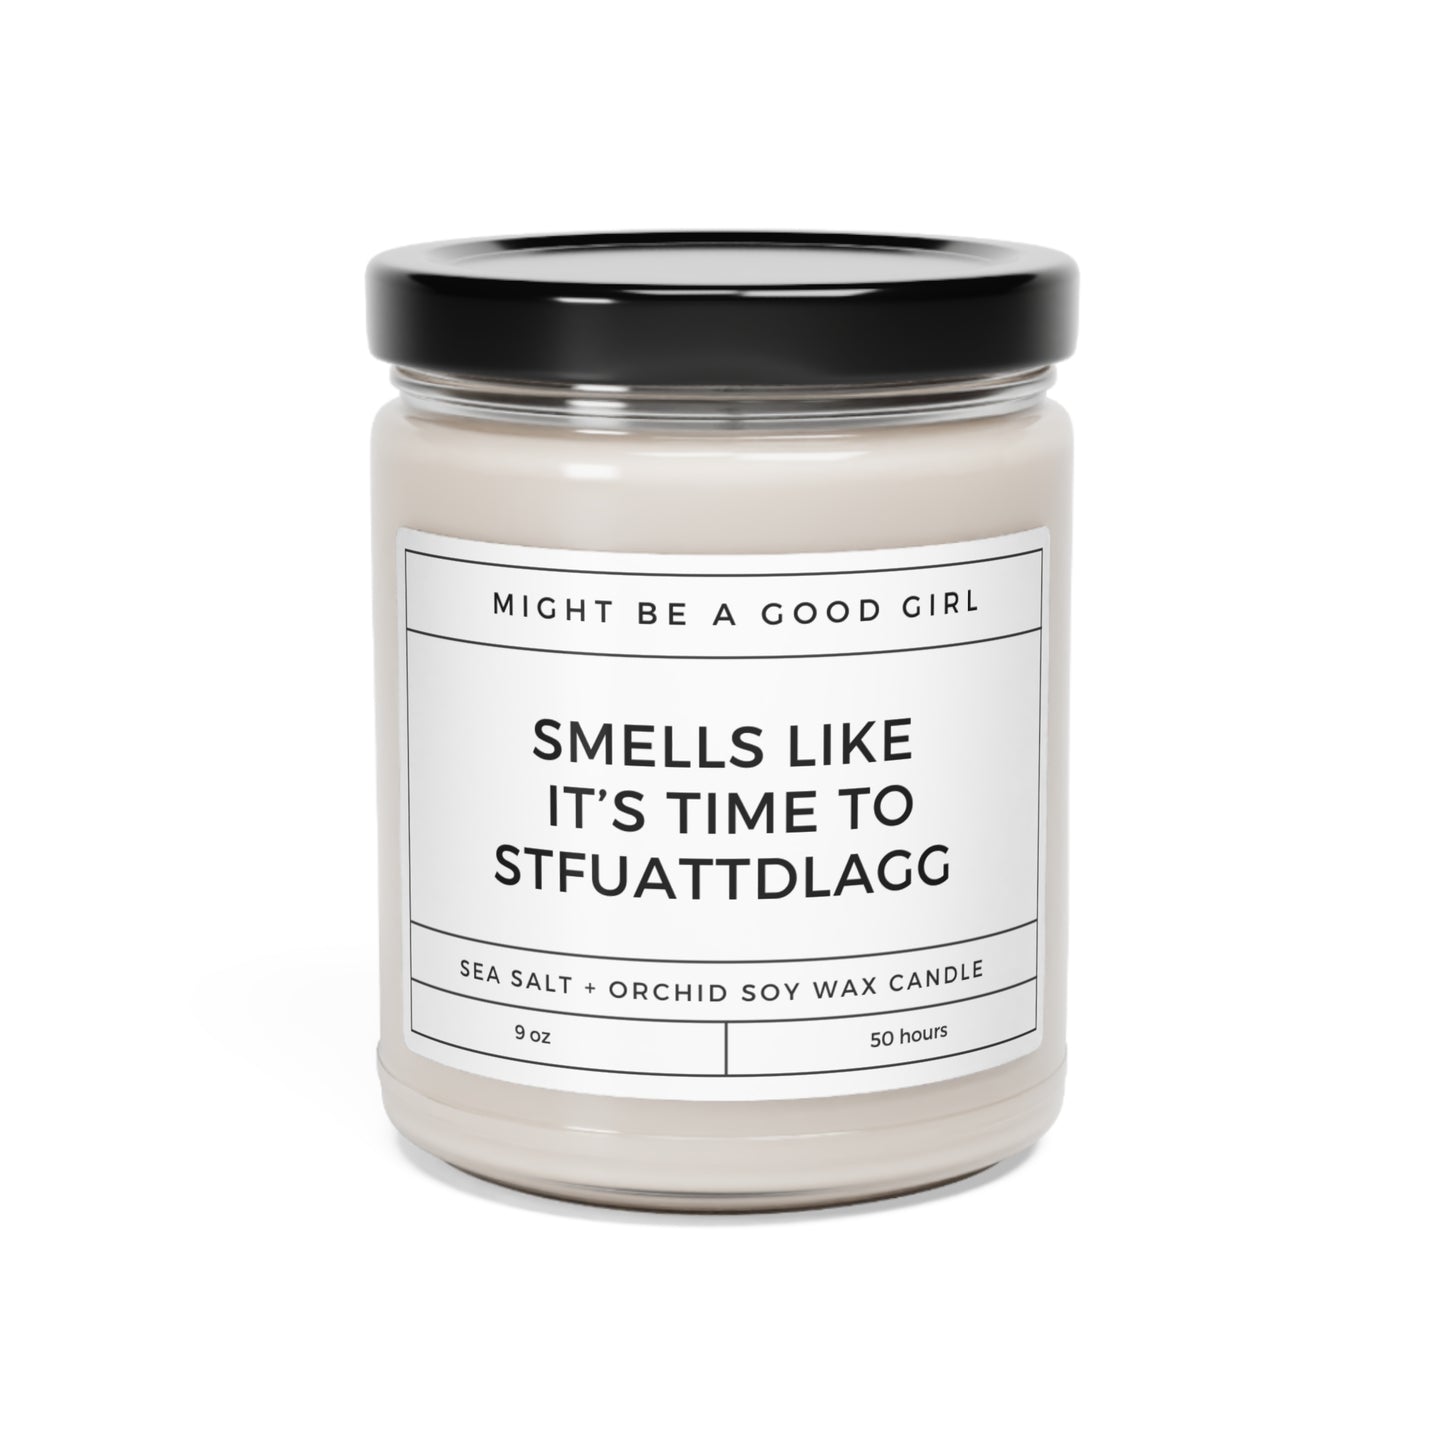 Smells Like It's Time To STFUATTDLAGG Scented Candle